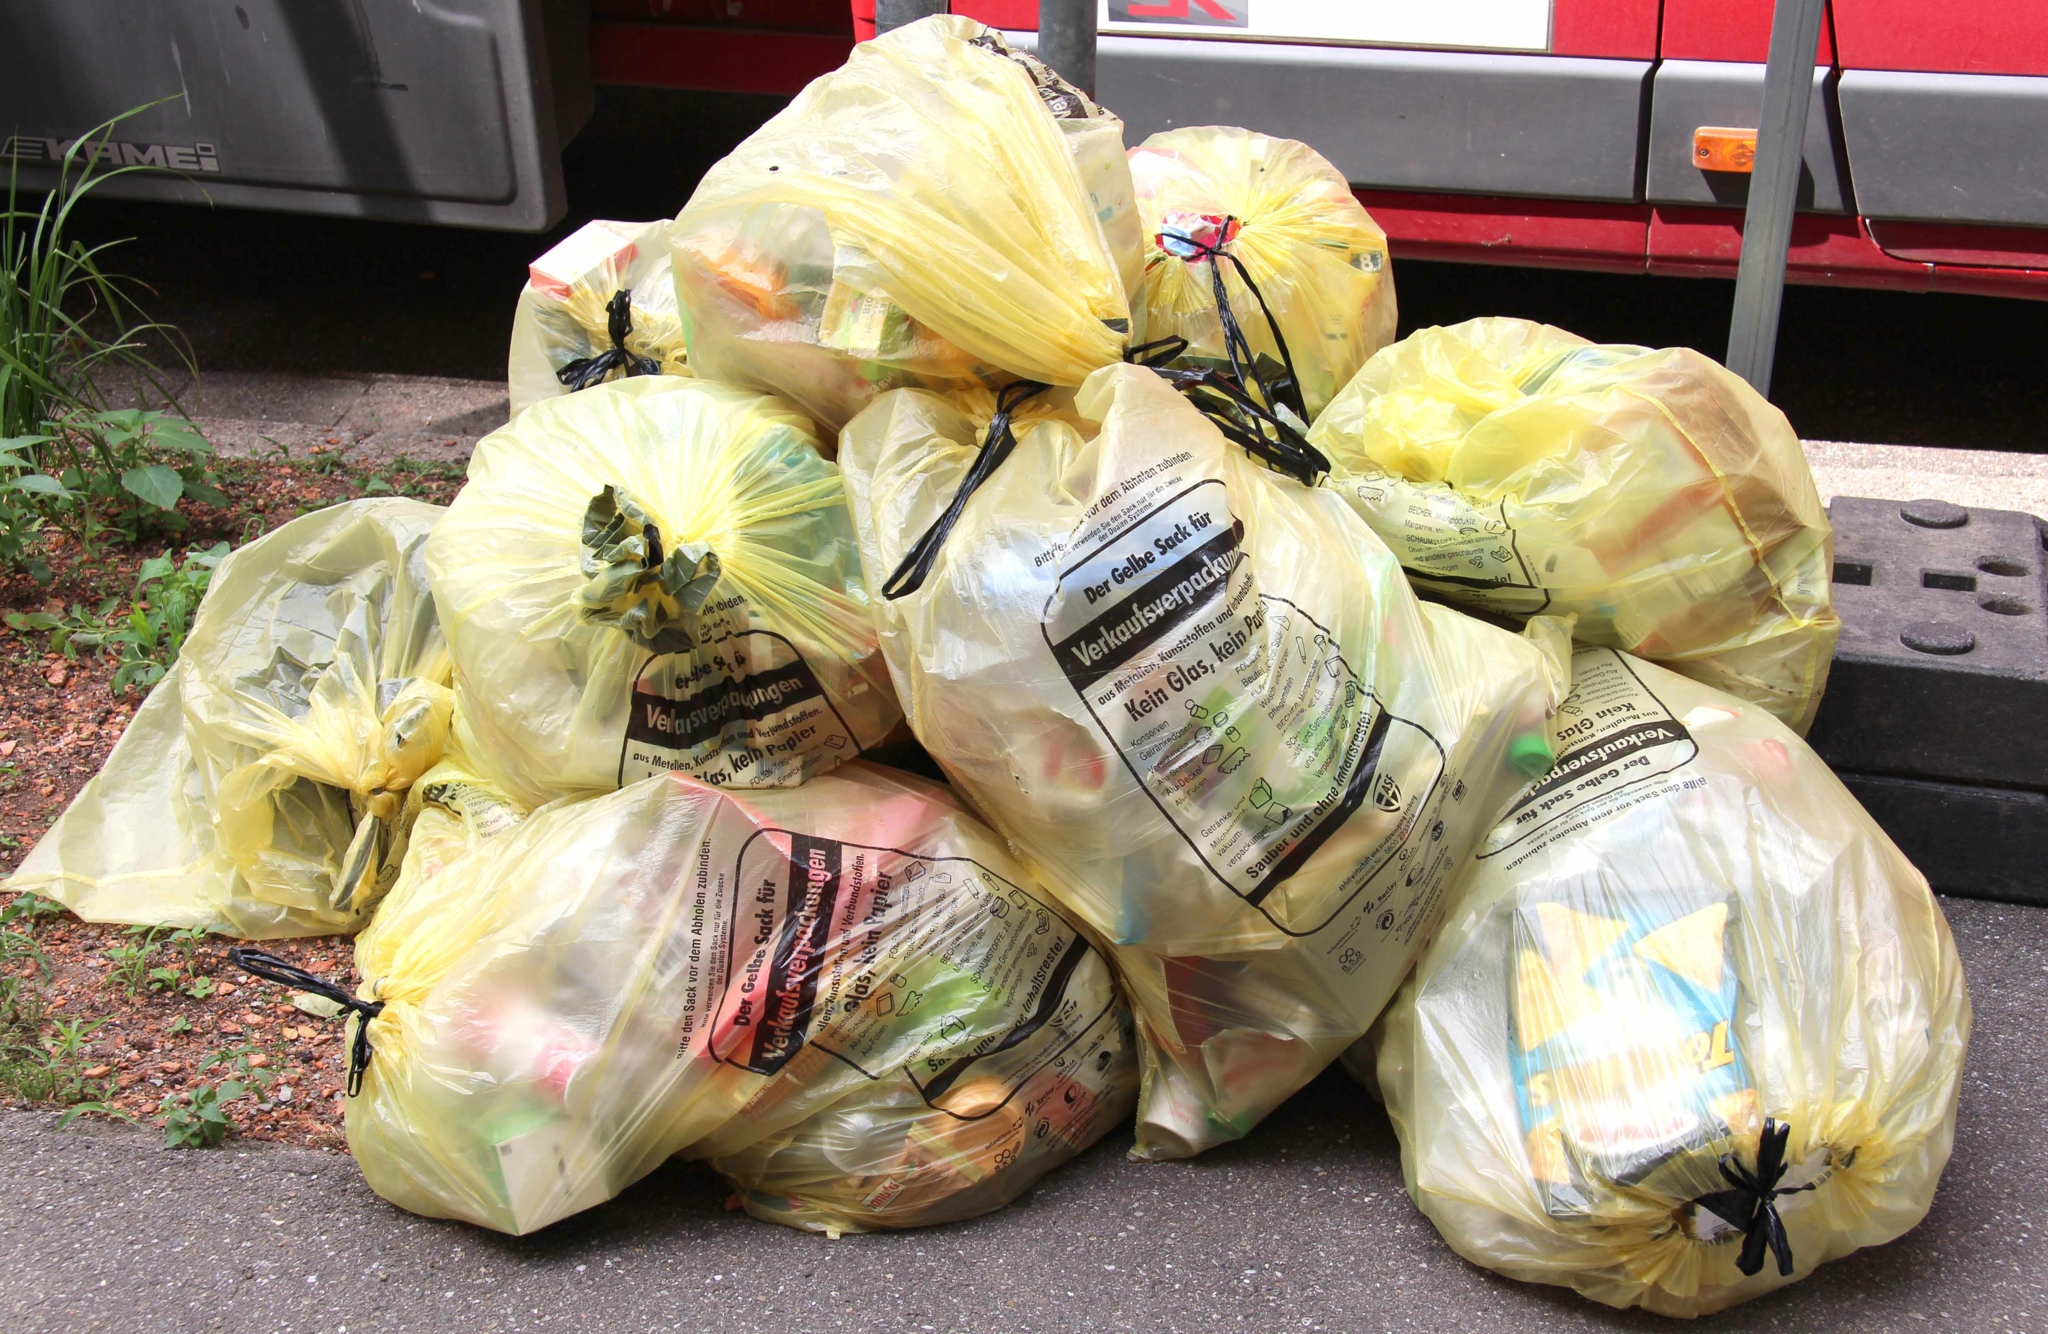 The photo shows several yellow bags at the roadside.